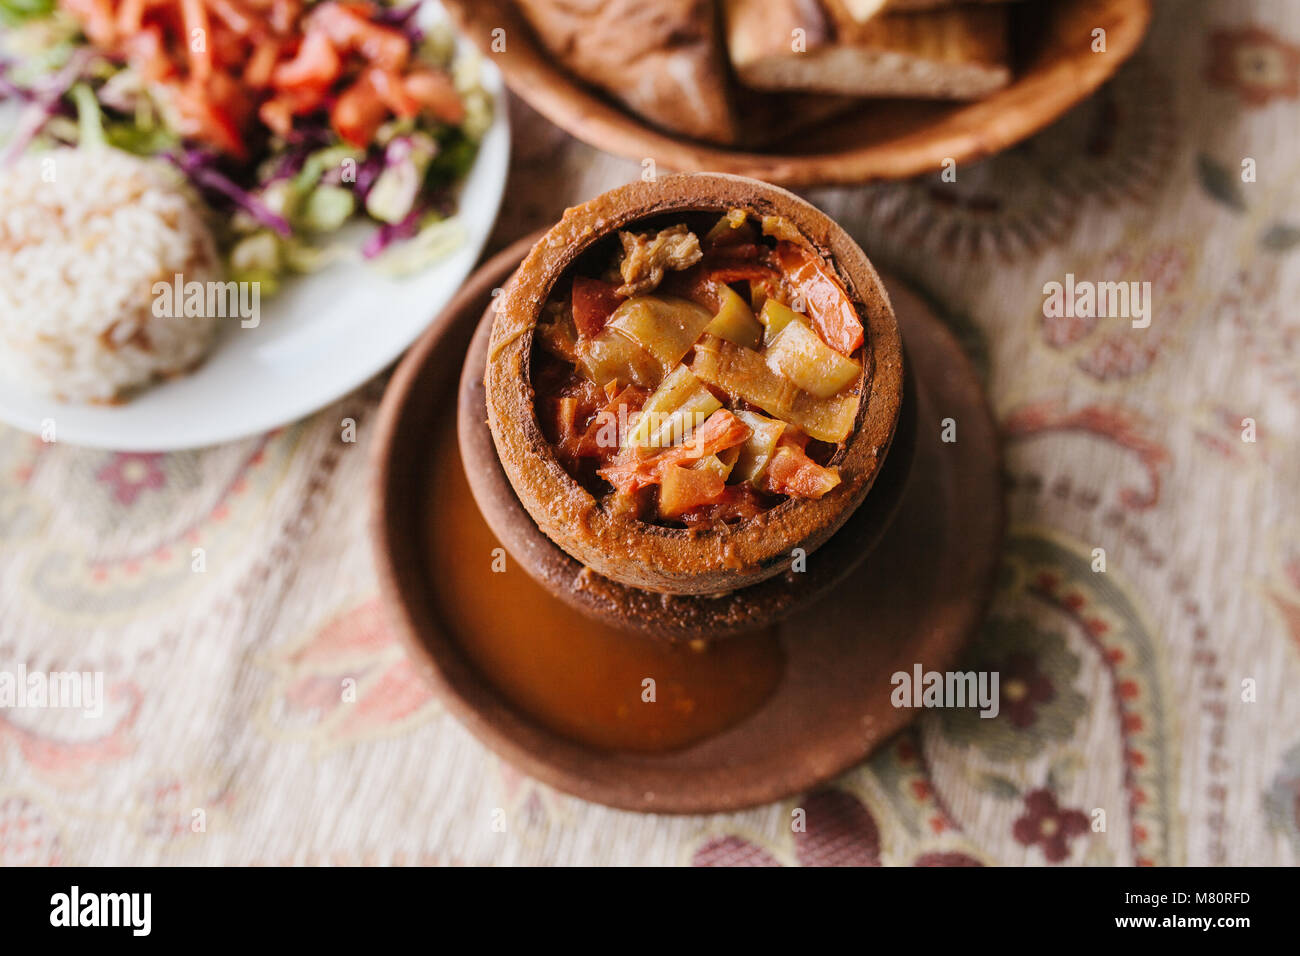 The national Turkish dish in the pot that is broken before use is called Testi-kebab. Stock Photo